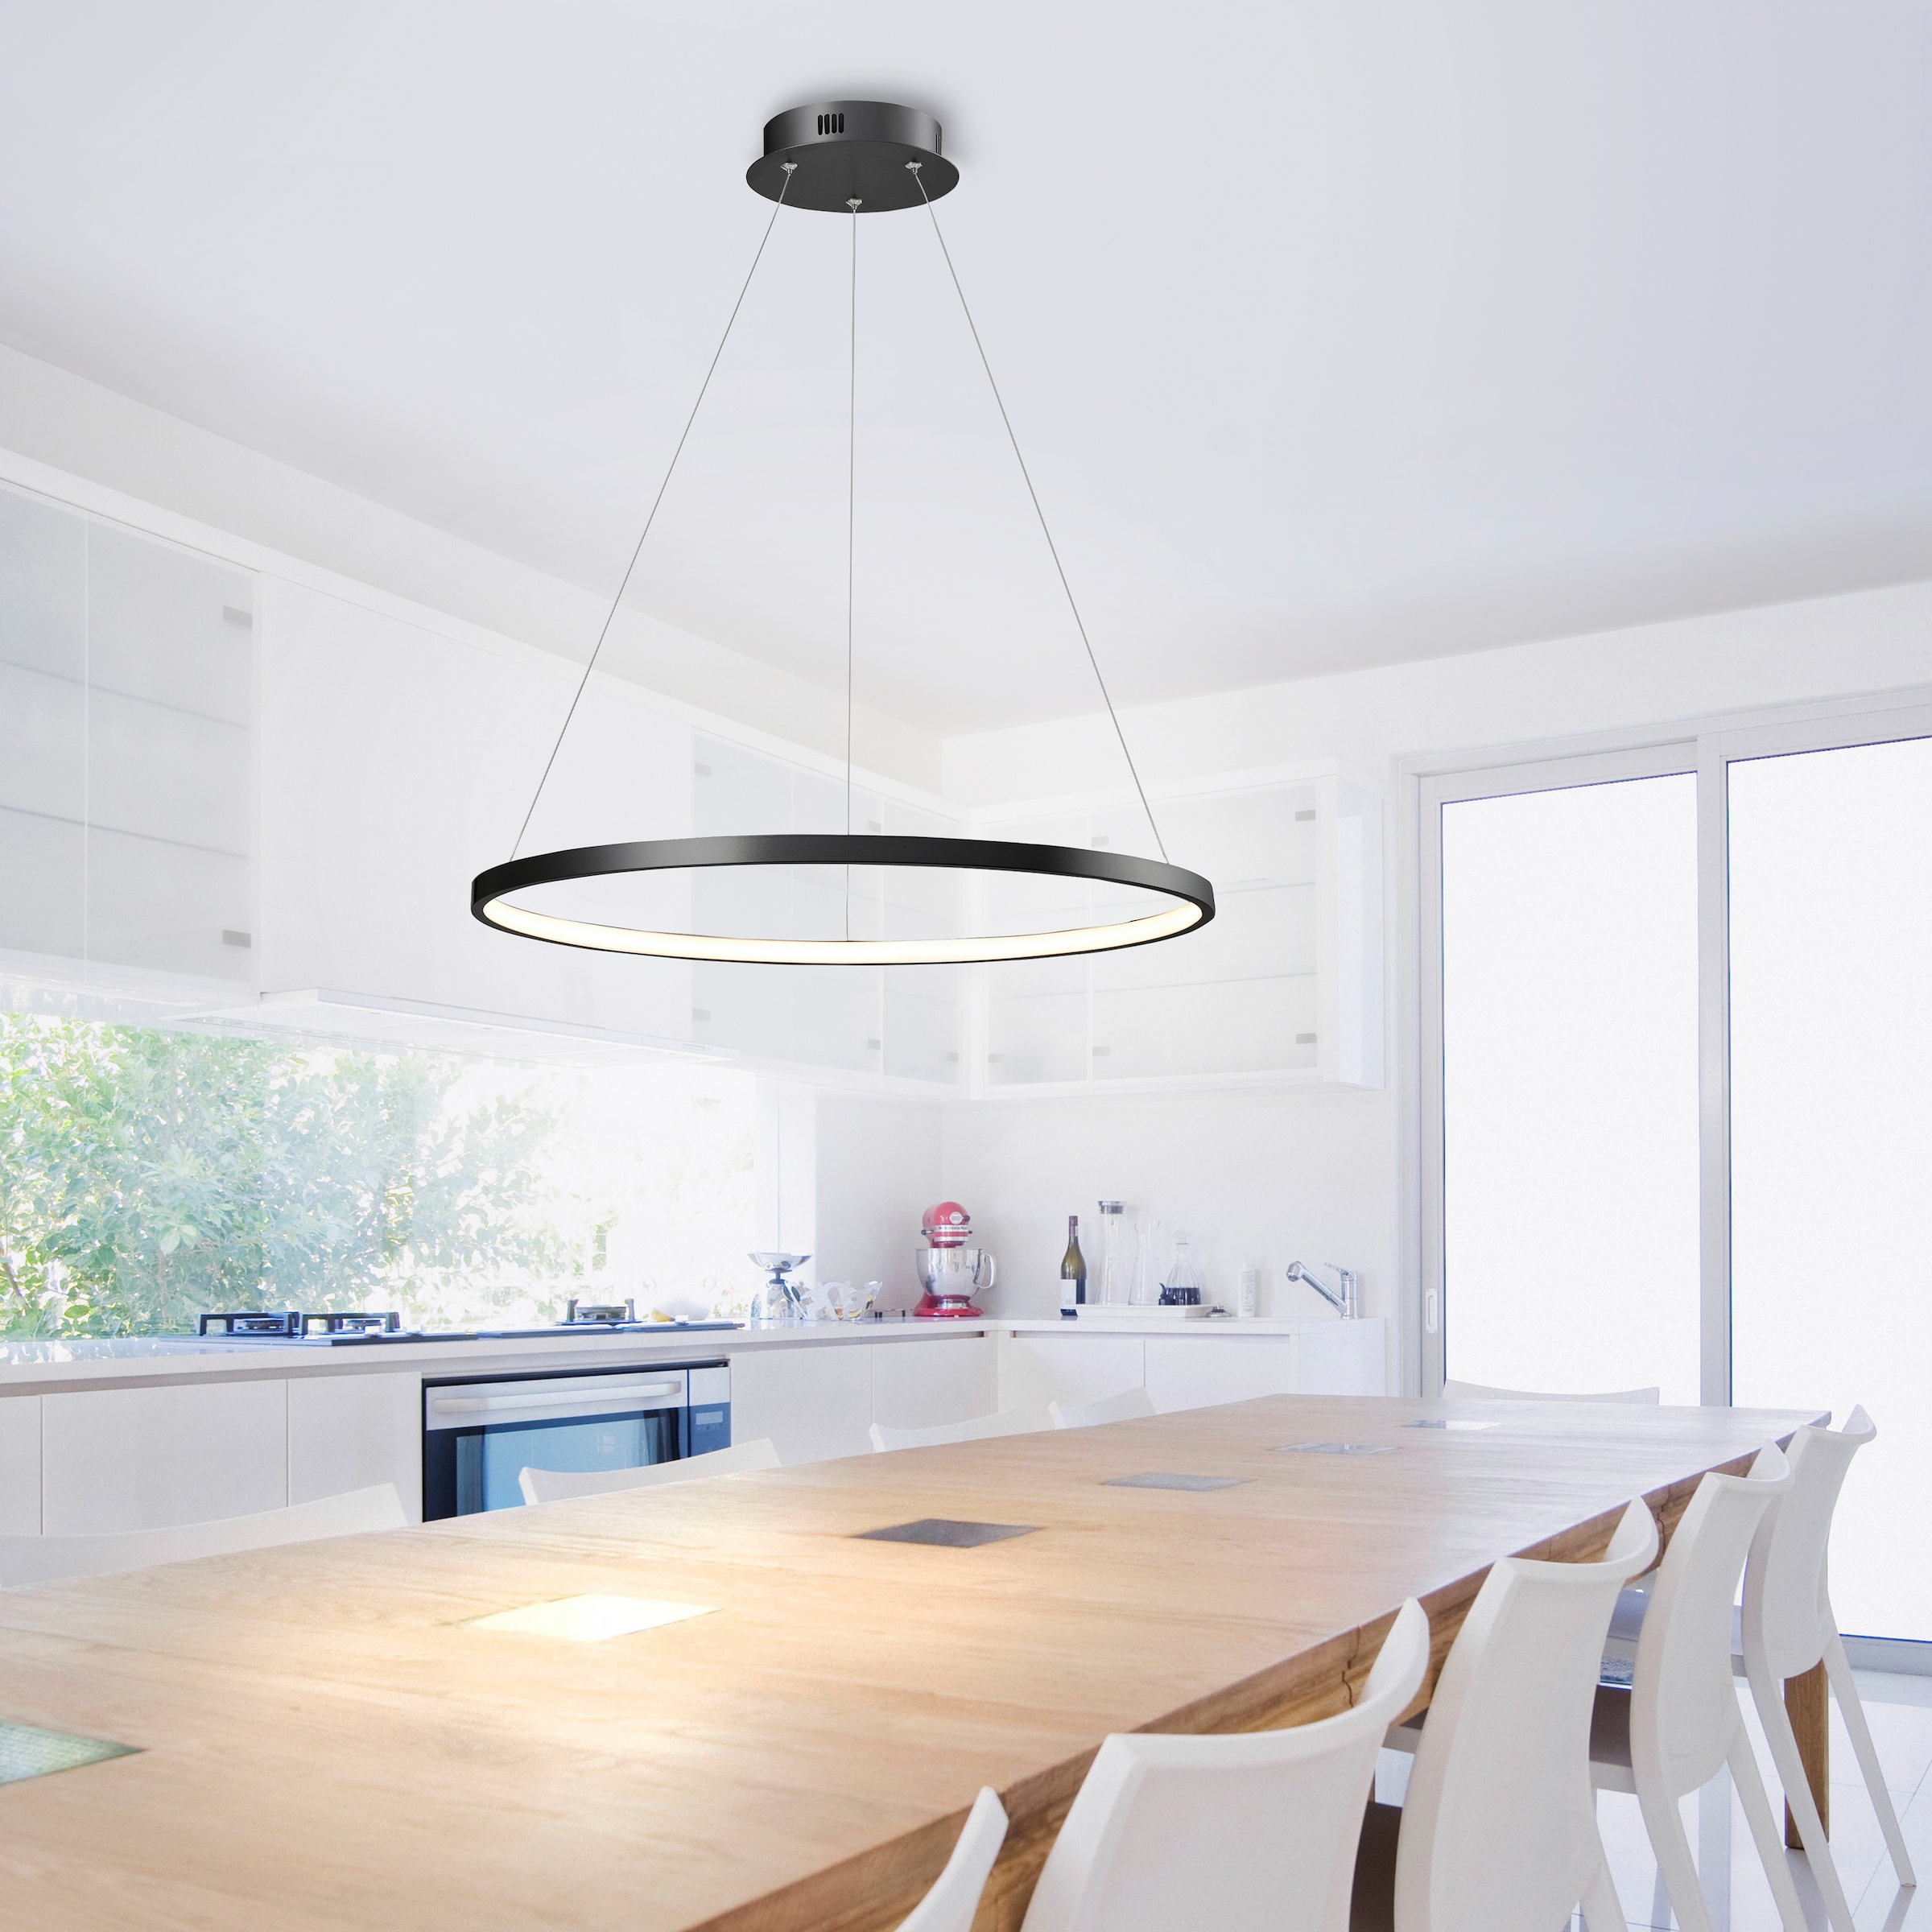 Places of Style LED Pendelleuchte modern kaufen flammig-flammig, Ring online 1 »Raylan«, Hängelampe LED